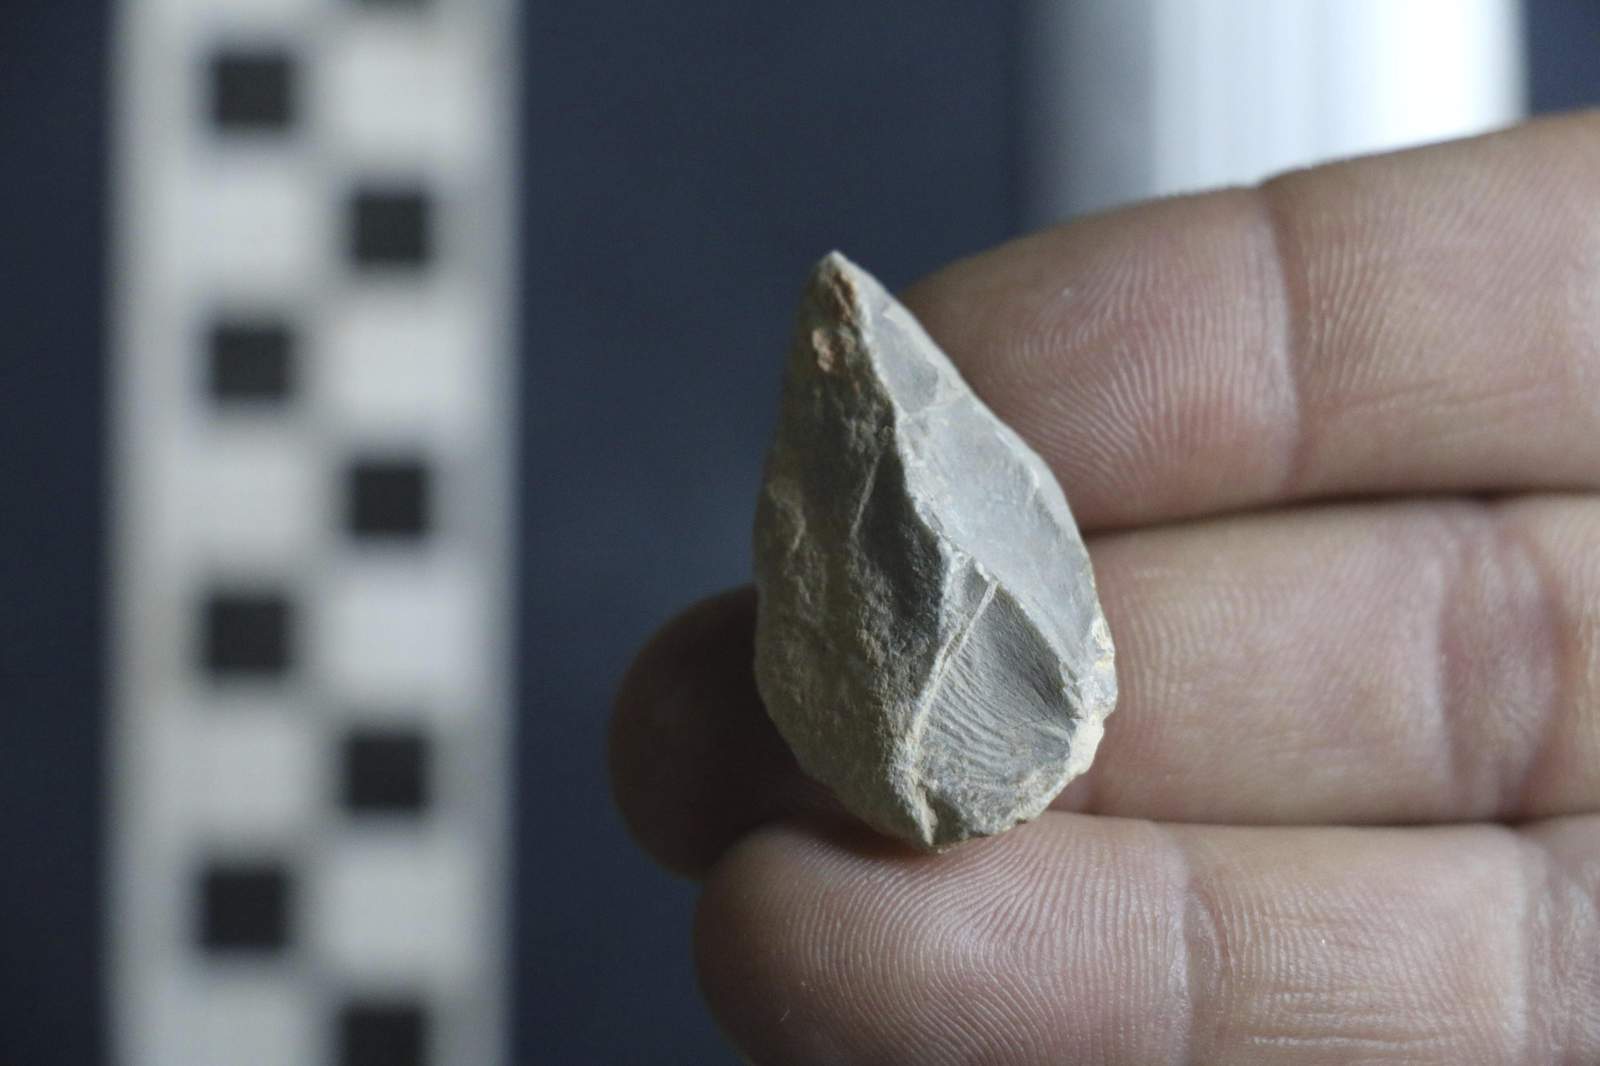 Stone tools suggest earlier human presence in North America